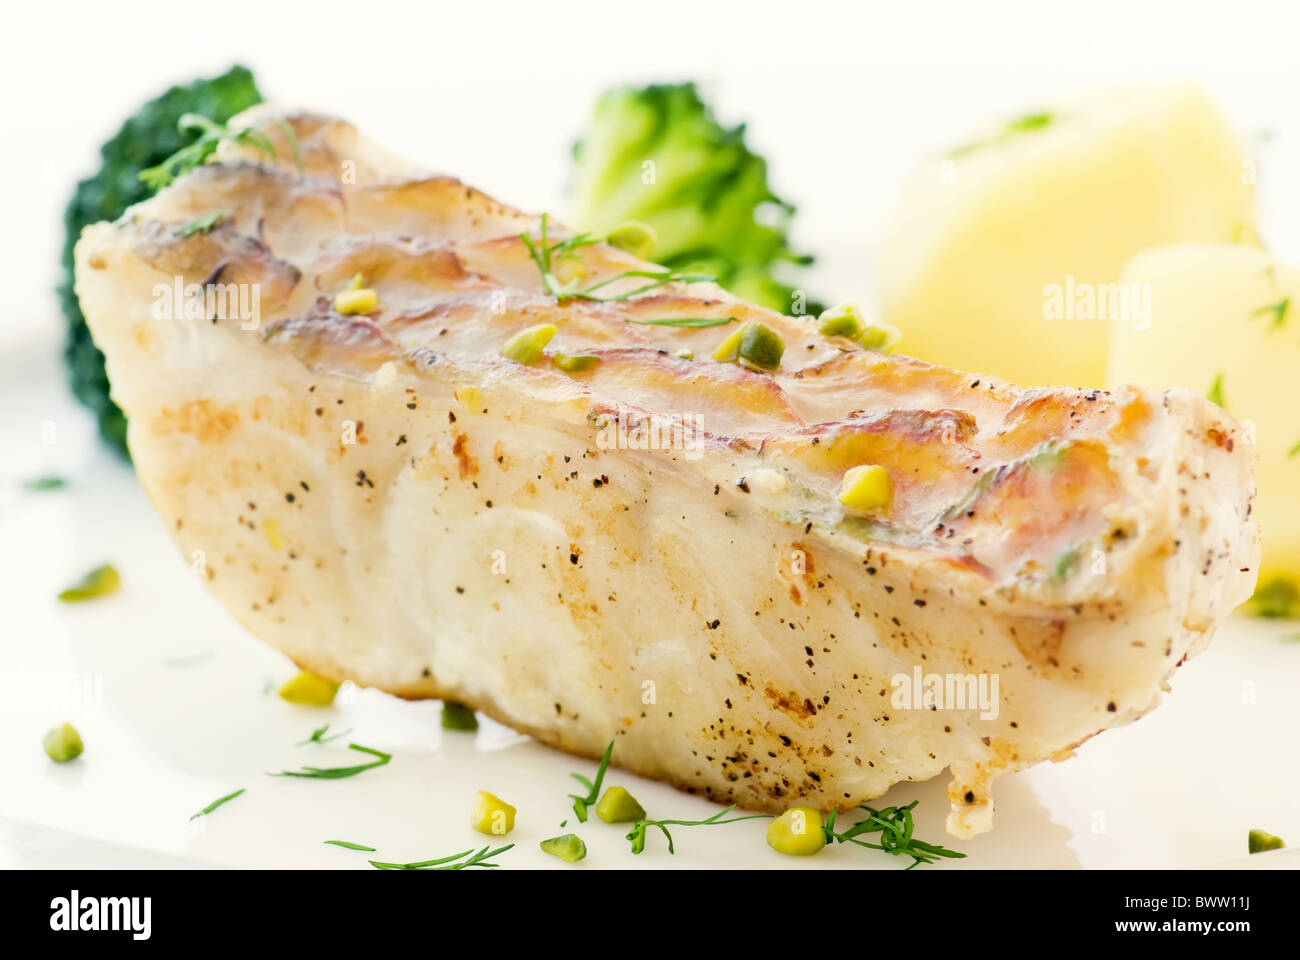 Parrot fish steak with vegetables and chips as closeup on a white plate Stock Photo